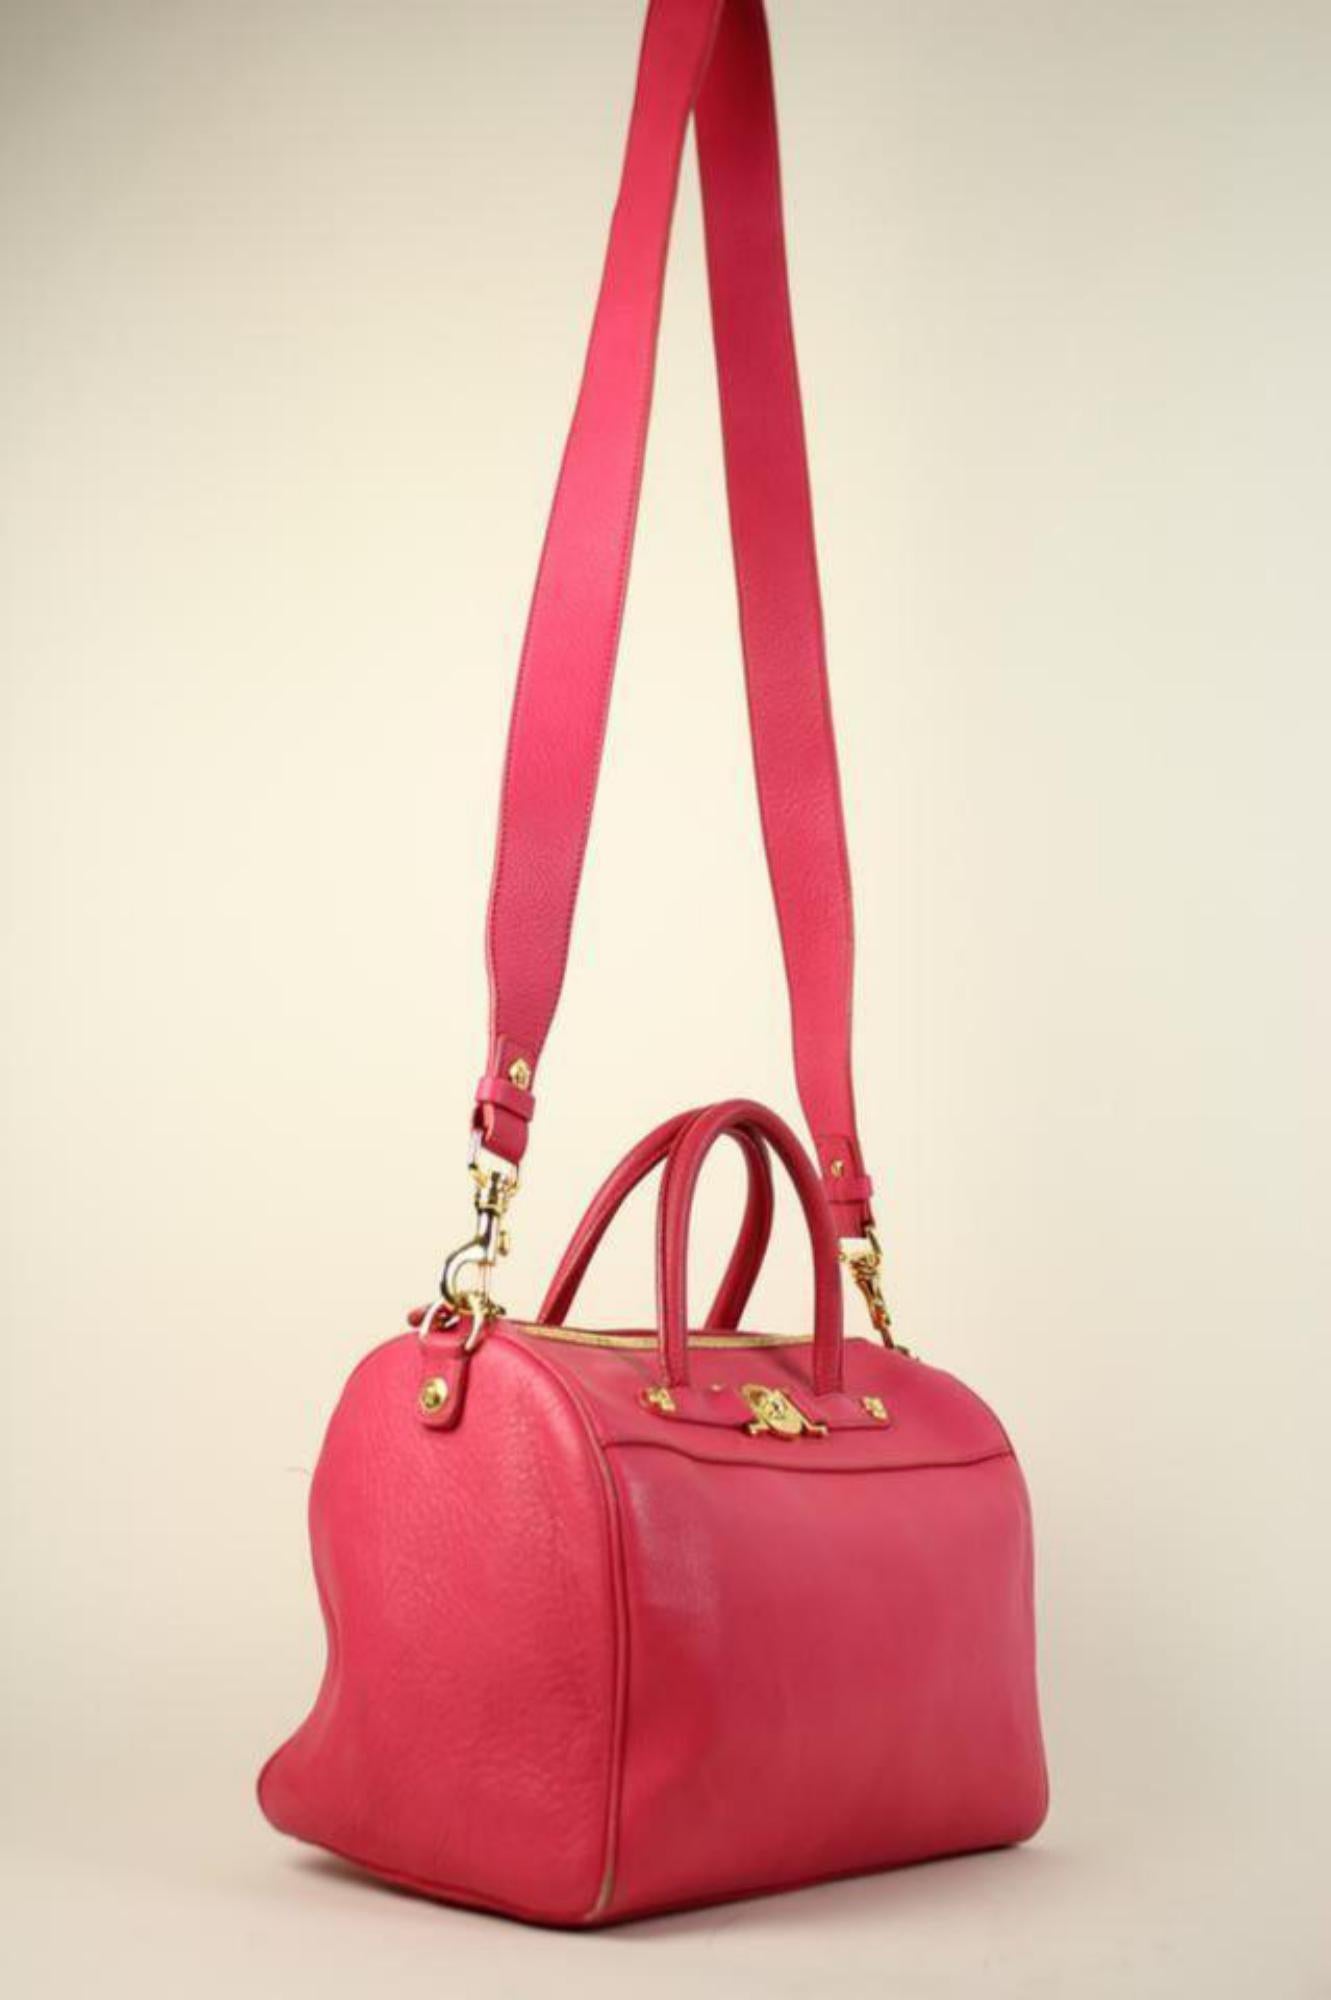 Versace Hot Two Way Boston Vvav1 Pink Leather Shoulder Bag In Good Condition For Sale In Forest Hills, NY